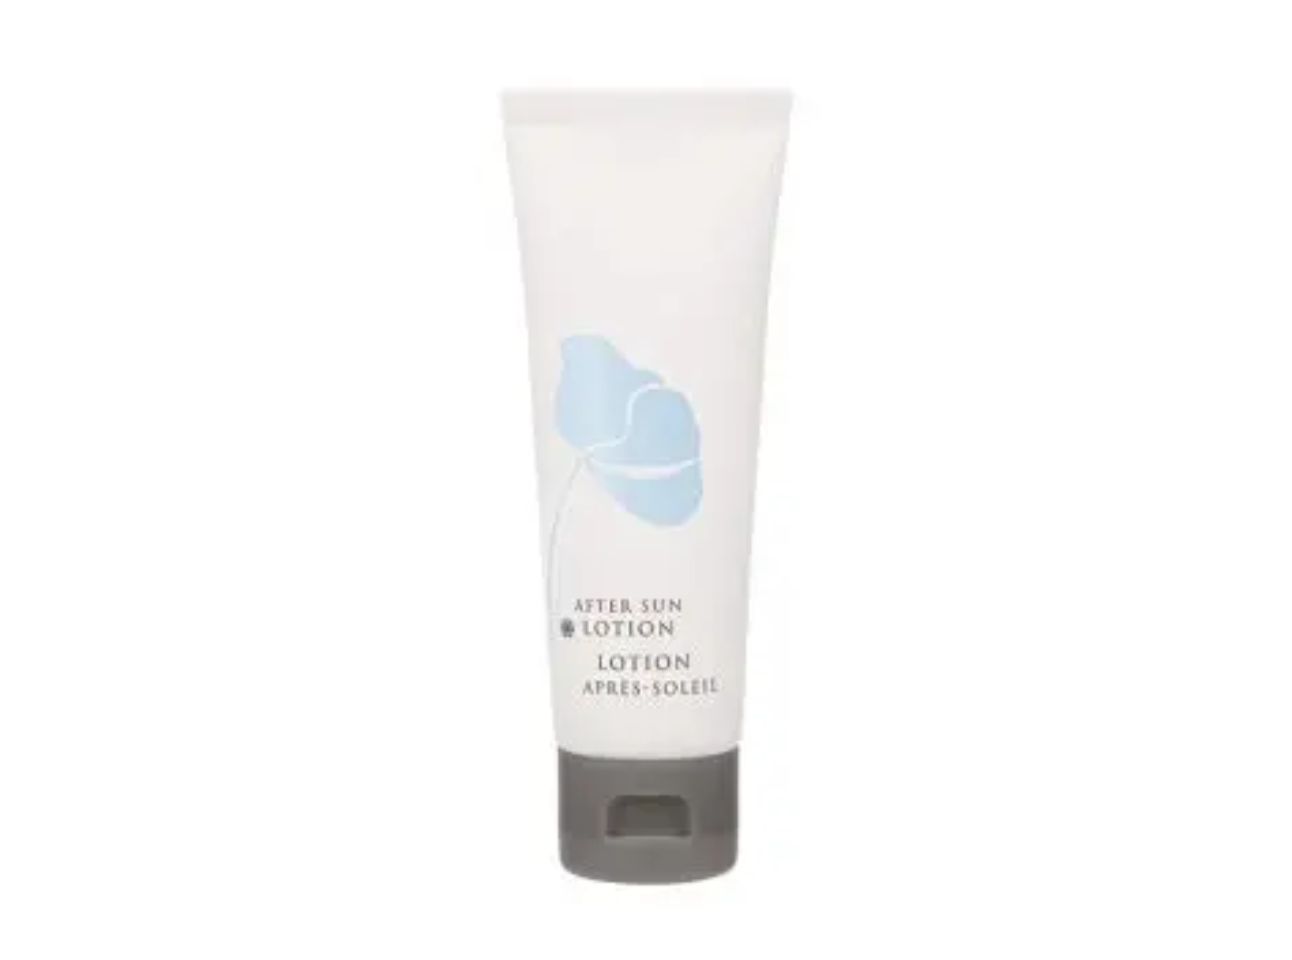 Cocooning Accessoires - Feuchtigkeitsspendende After Sun Lotion, 50 ml